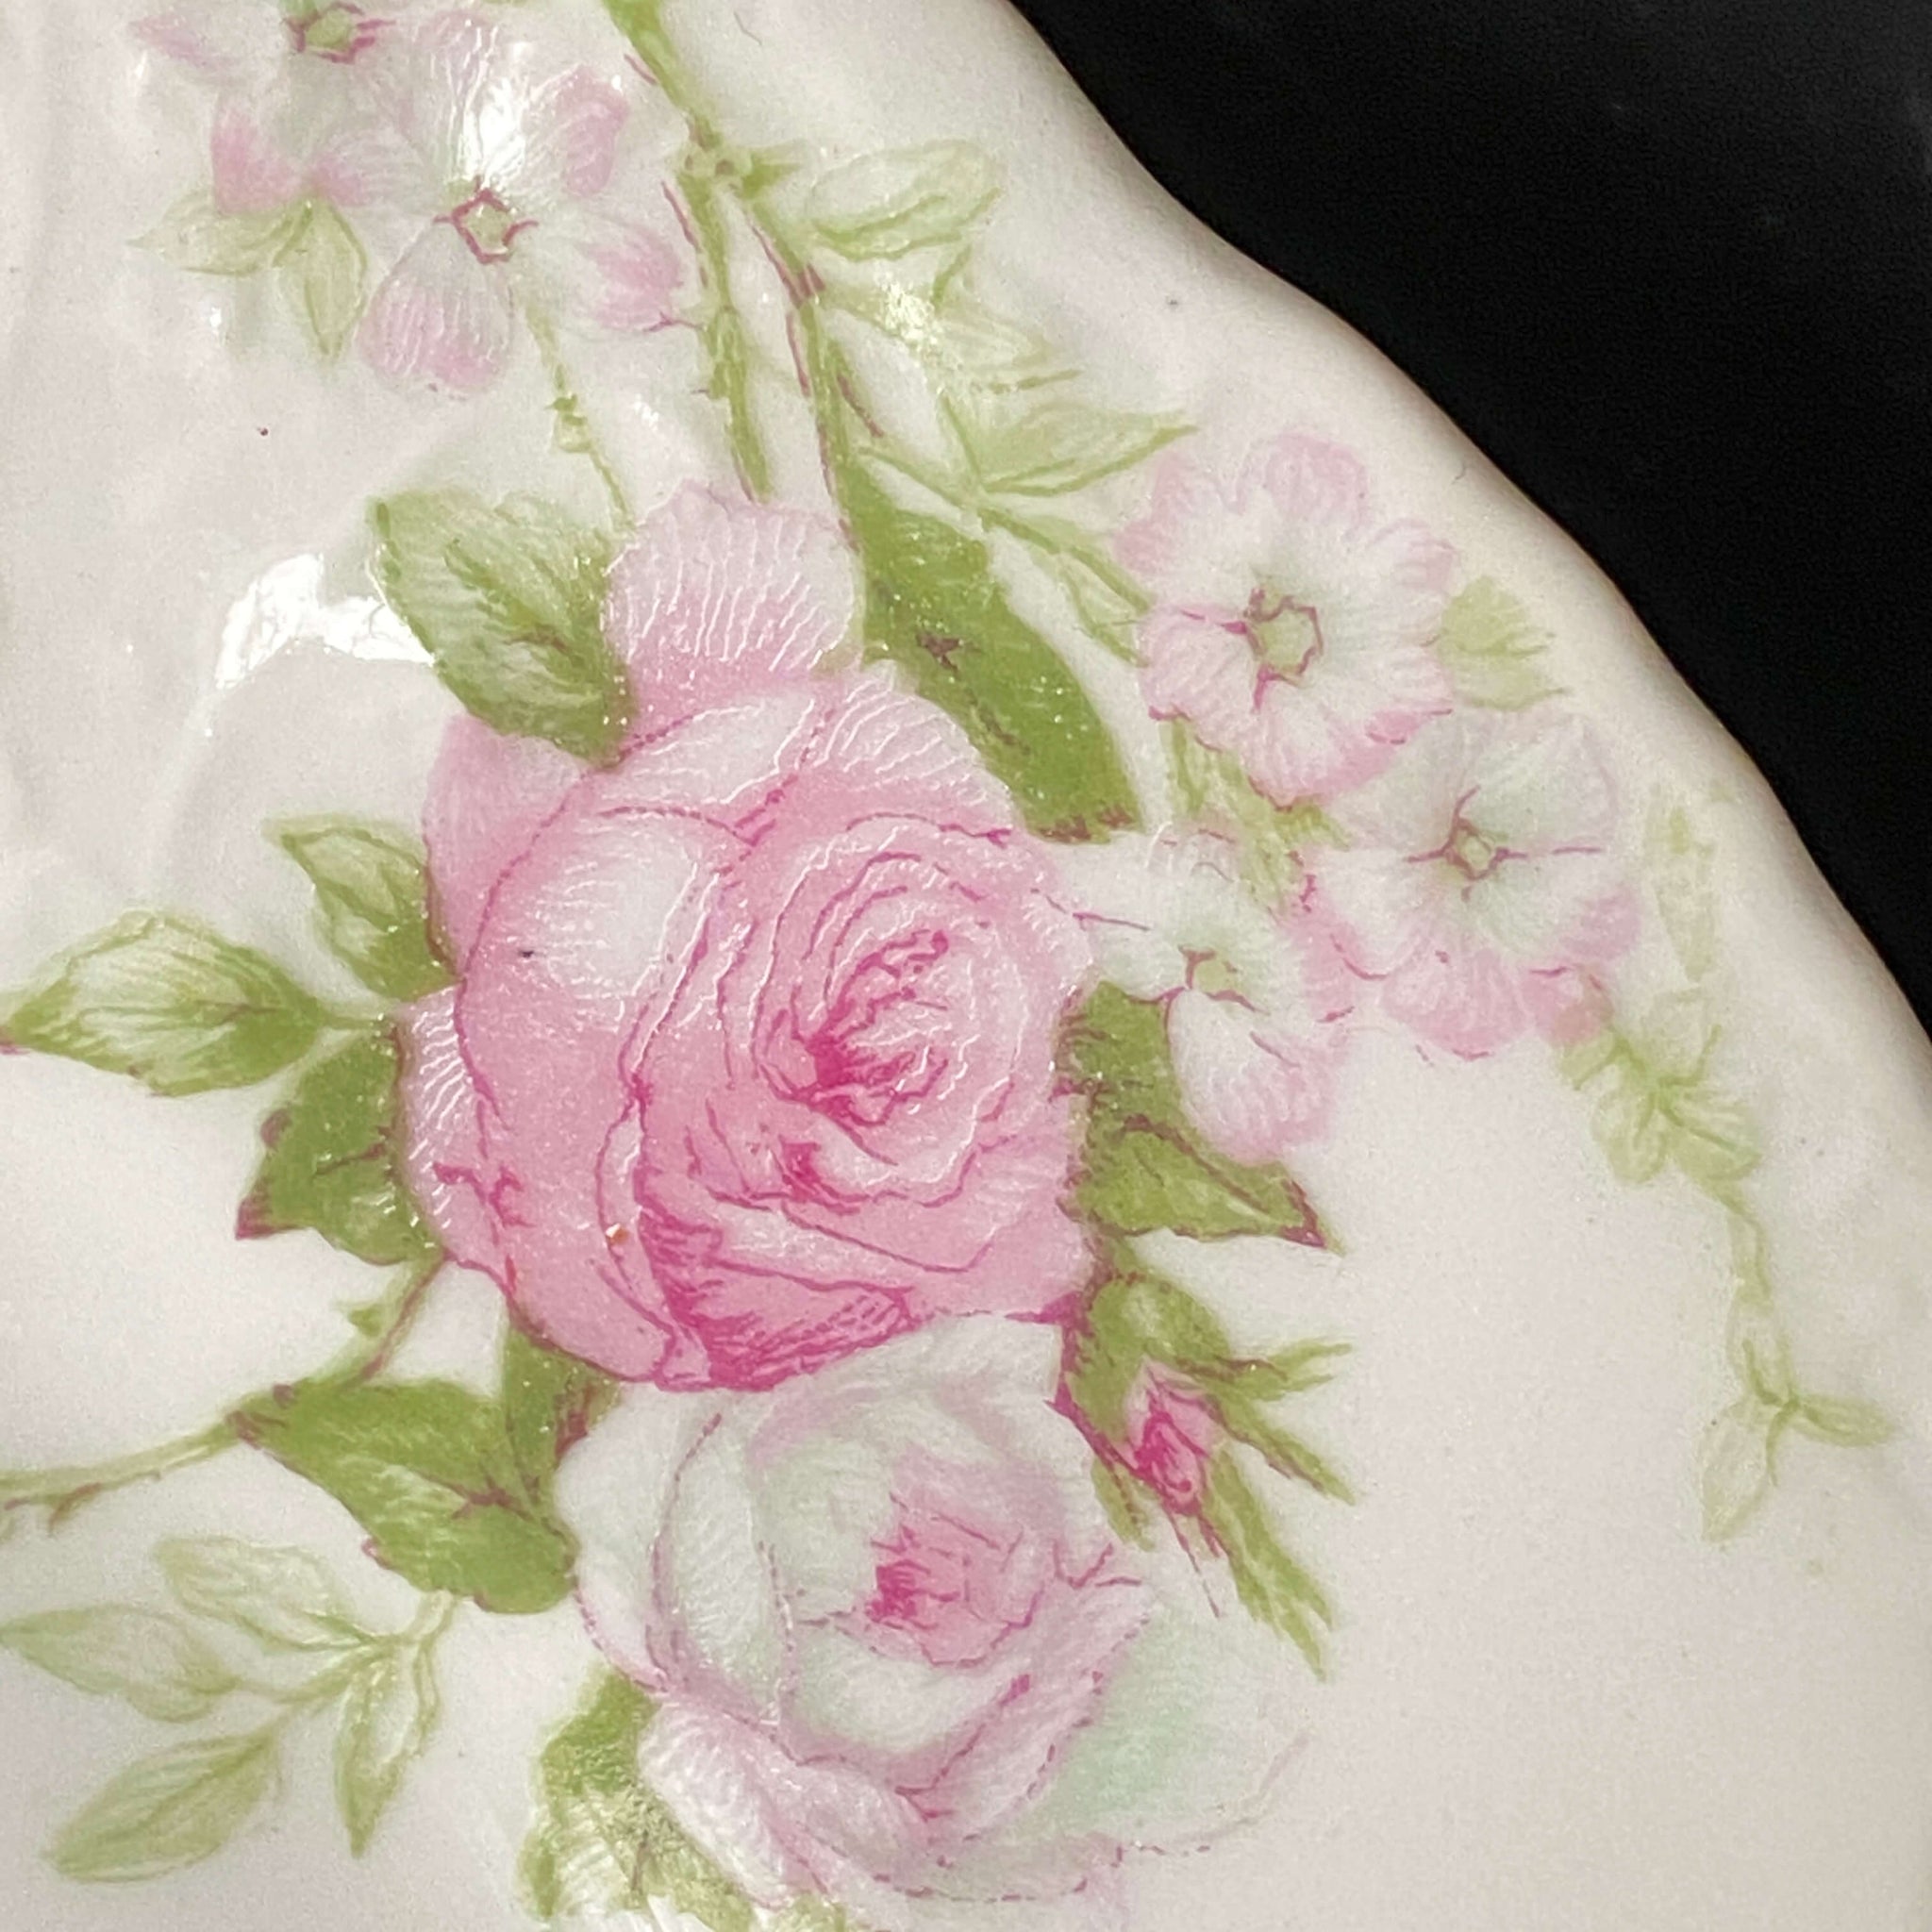 Antique Theodore Haviland Limoges Bread Plates circa 1903 - Set of Four Country French Cabbage Roses